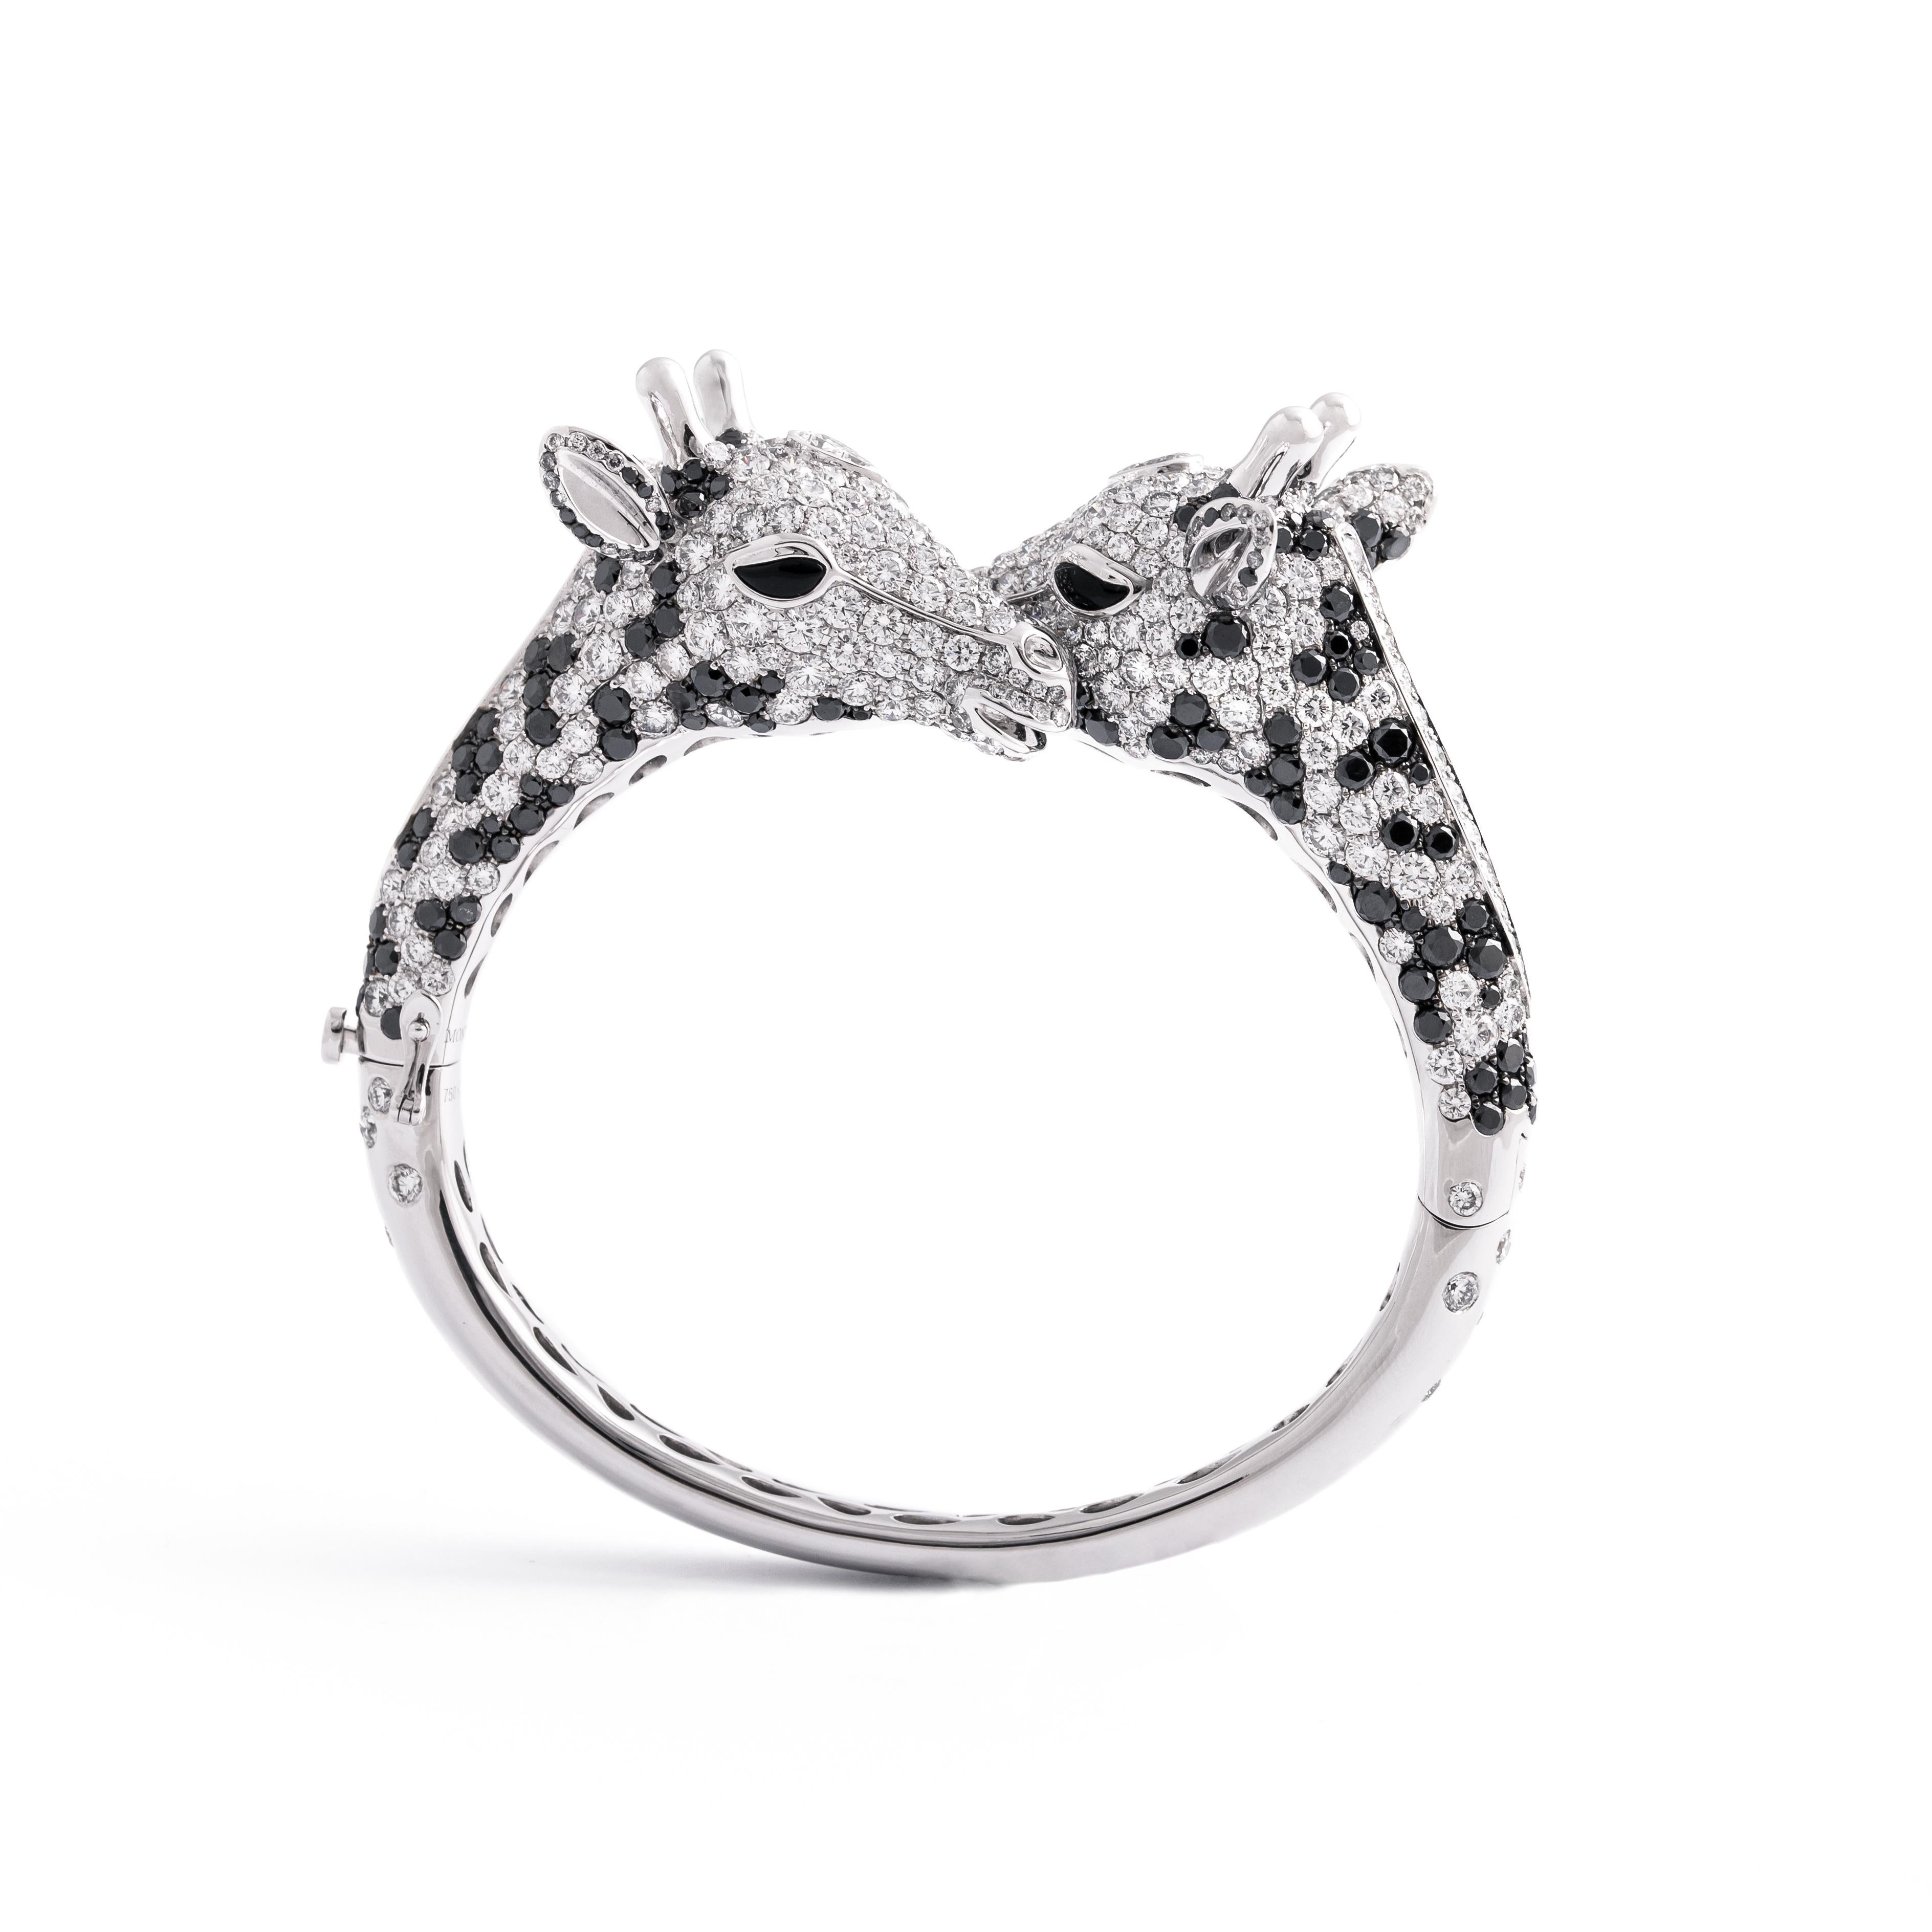 Giraffe bangle in 18kt white gold set with 553 diamonds 16.80 cts and 218 black diamonds 7.83 cts, 2 pear-shaped diamonds 0.55 cts and 4 onyx 0.44 cts              

Total weight: 54.70 grams